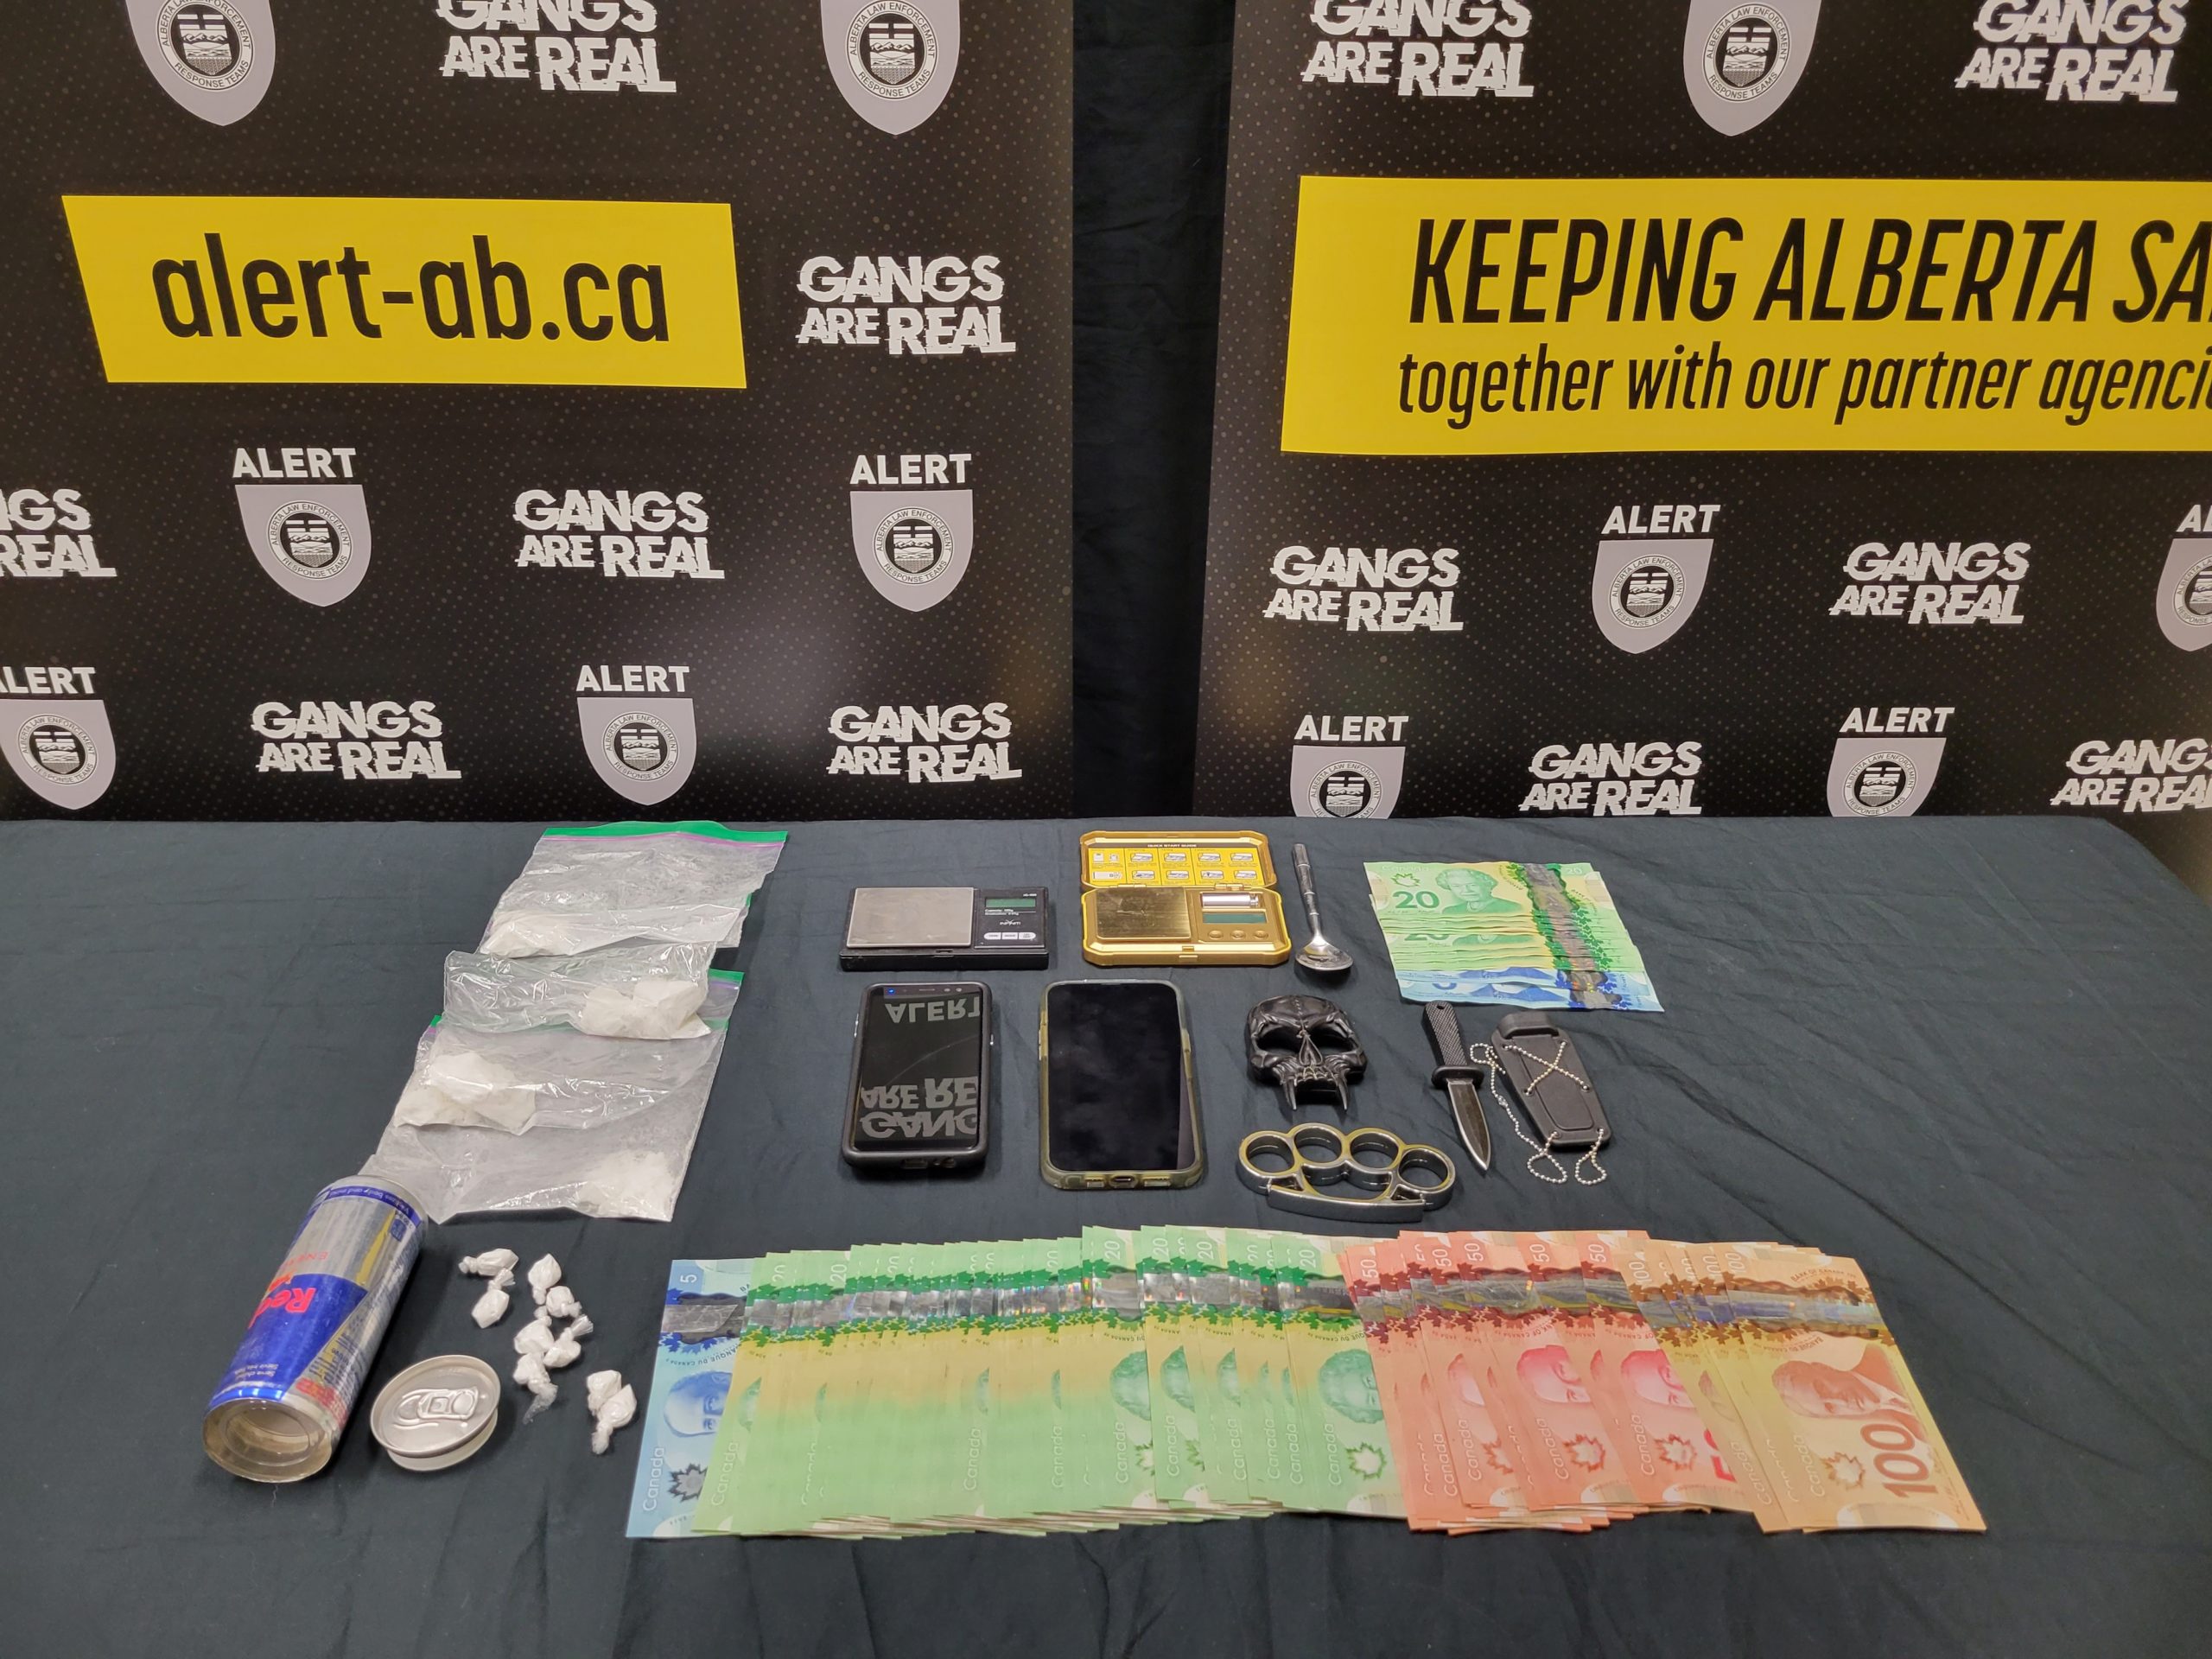 Drugs and cash were seized following an ALERT investigation in Fort McMurray.